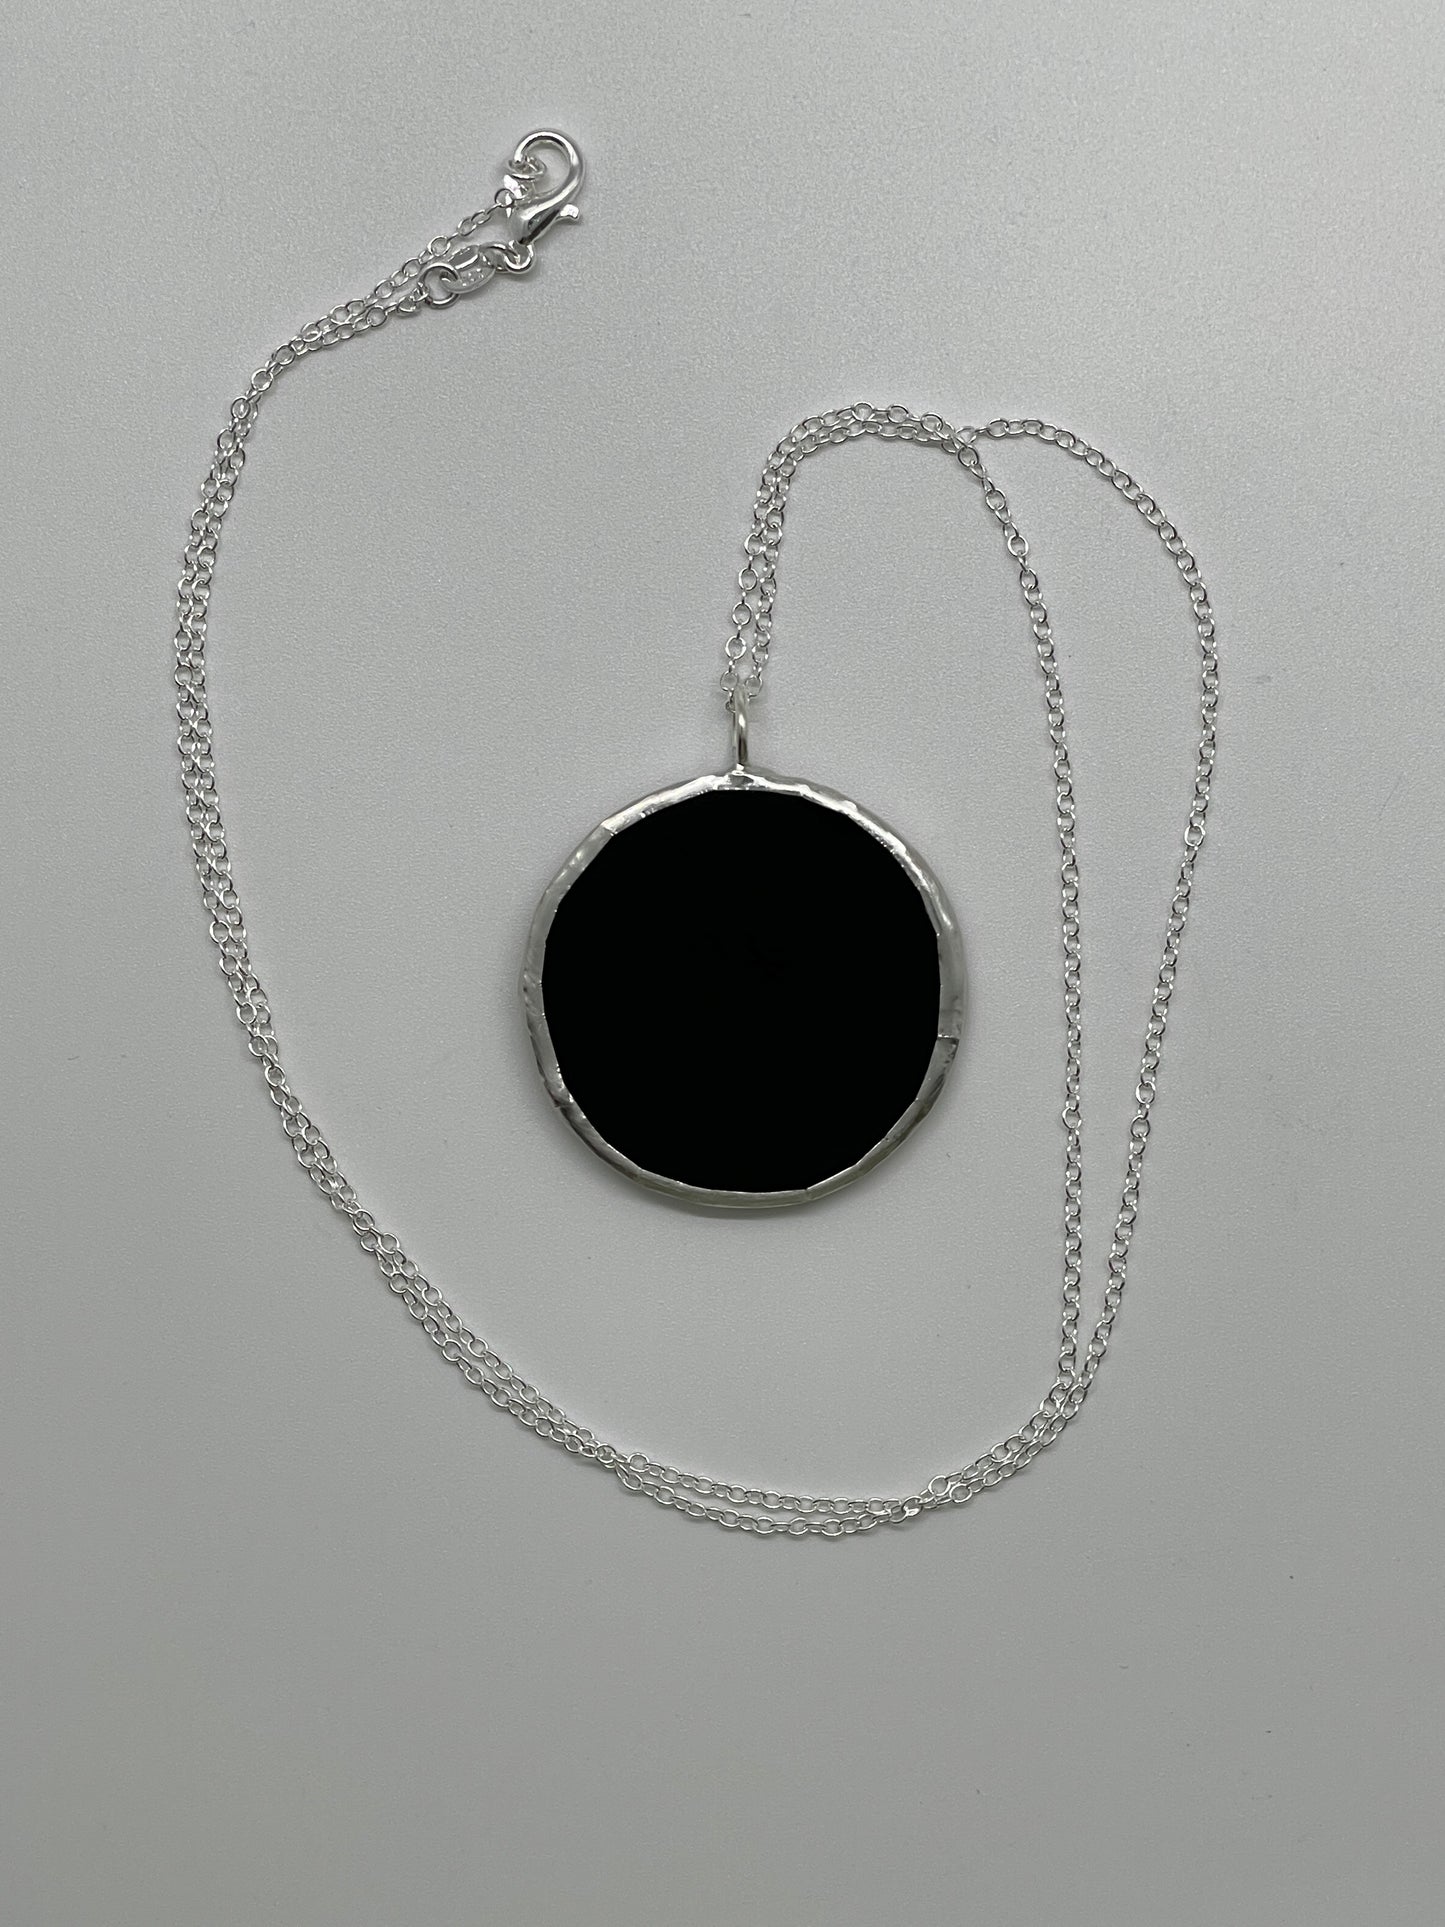 Large Stained Glass Necklace: 1.5” Circle, Opaque Black